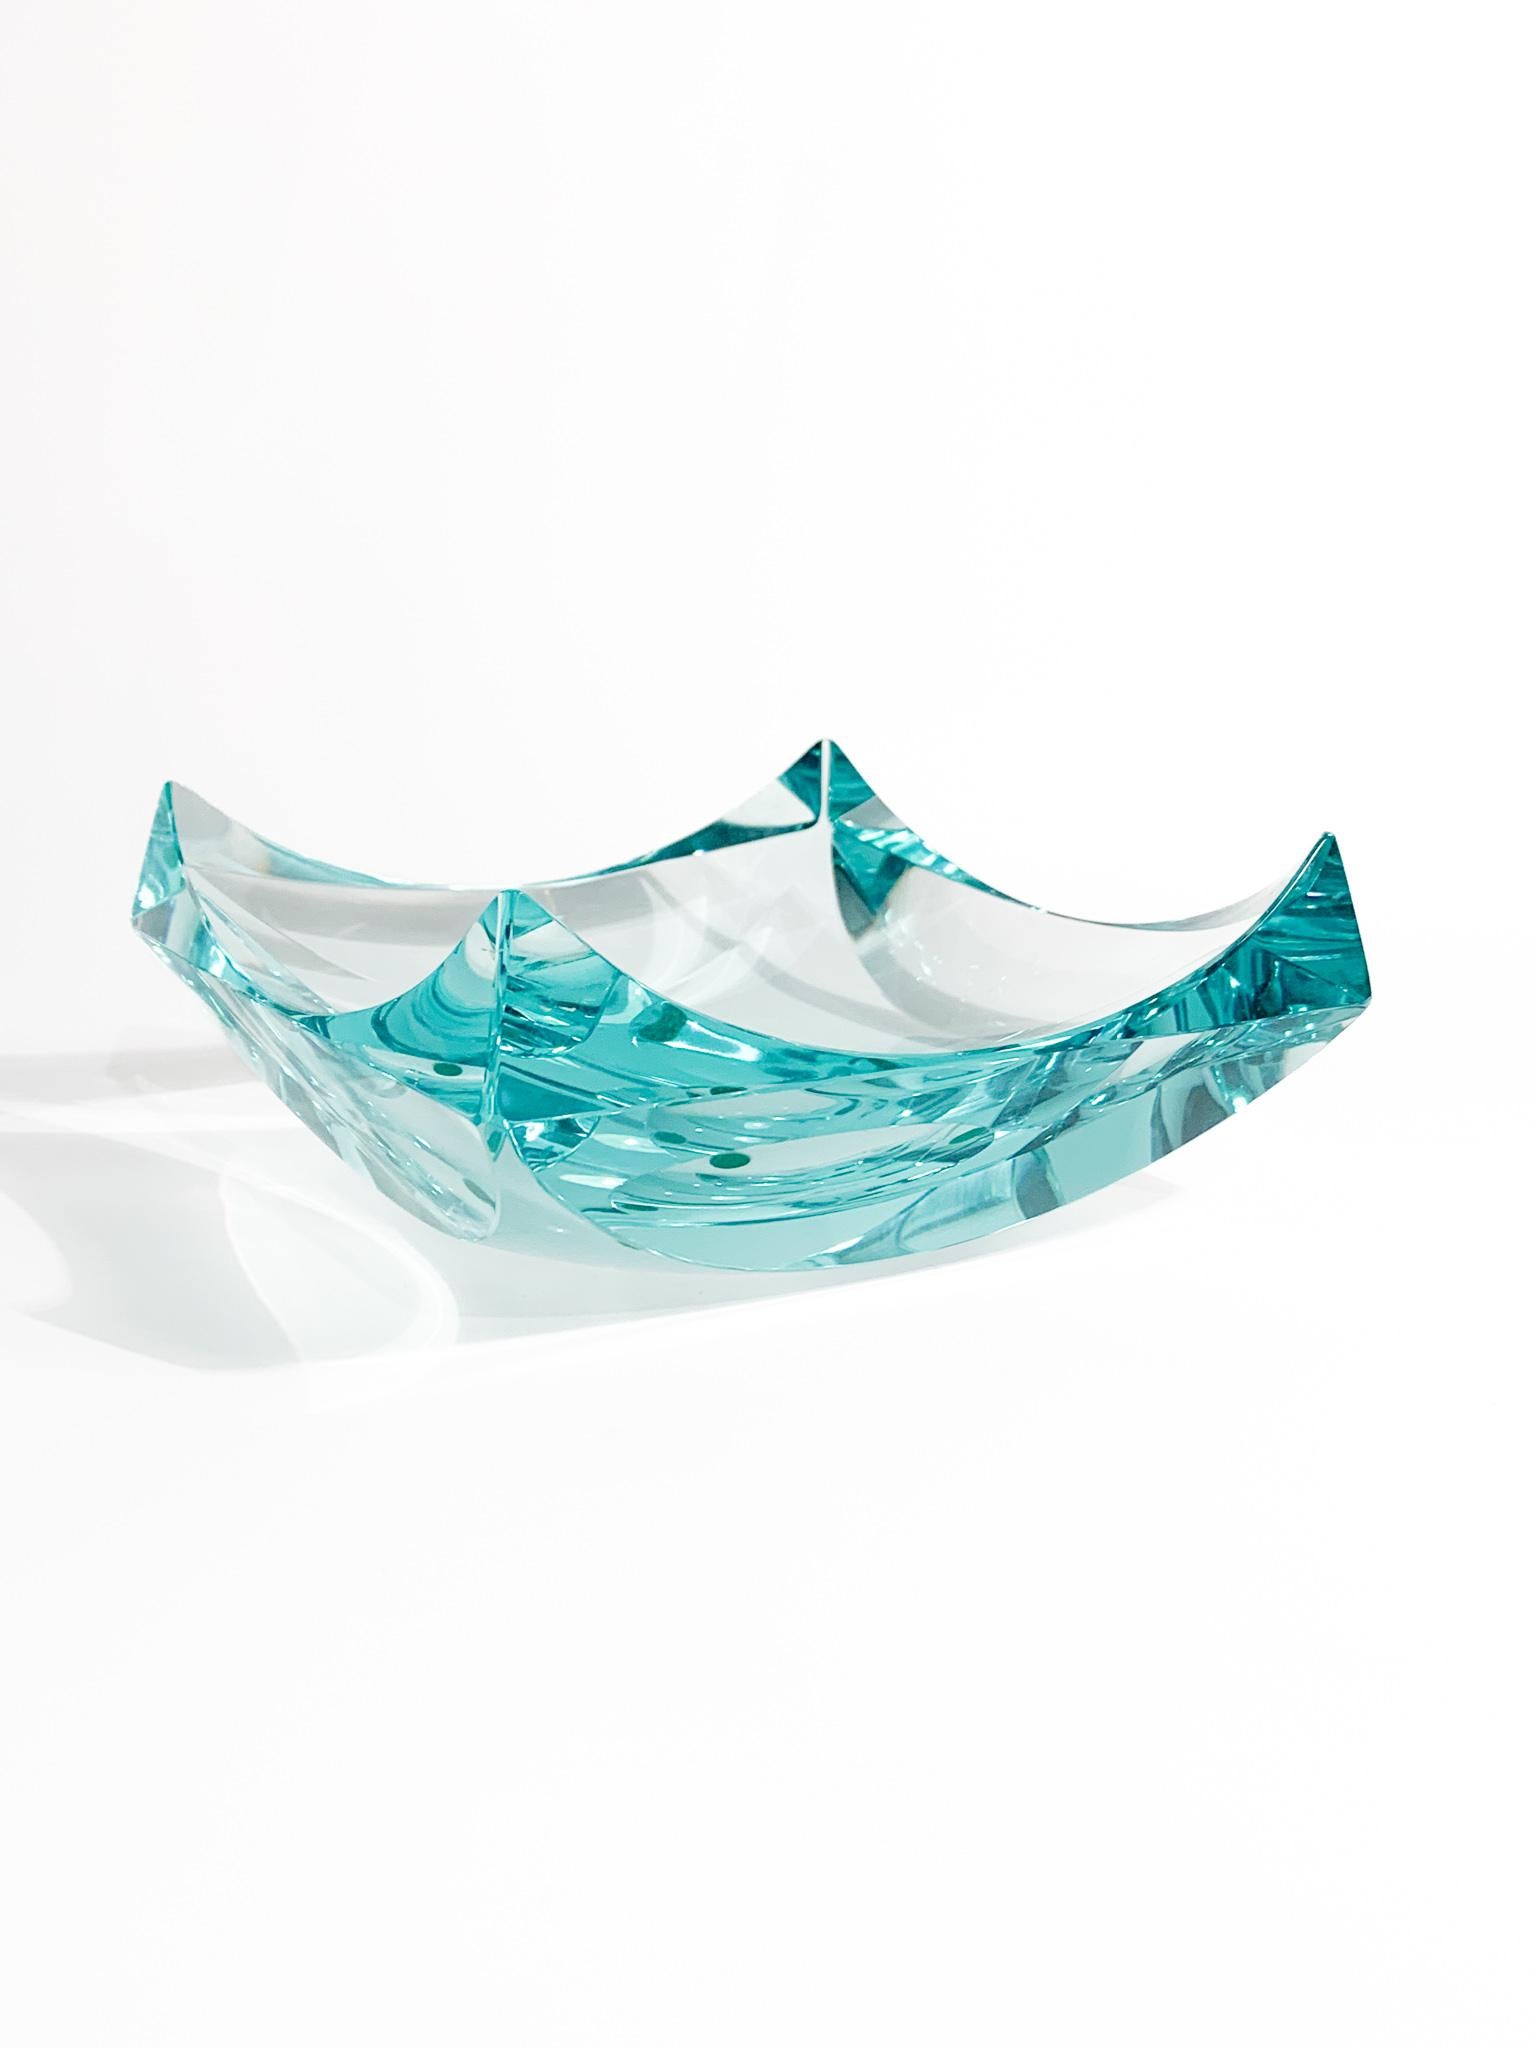 Mid-Century Modern Light Blue Glass Ashtray Attributed to Fontana Arte from the 1970s For Sale